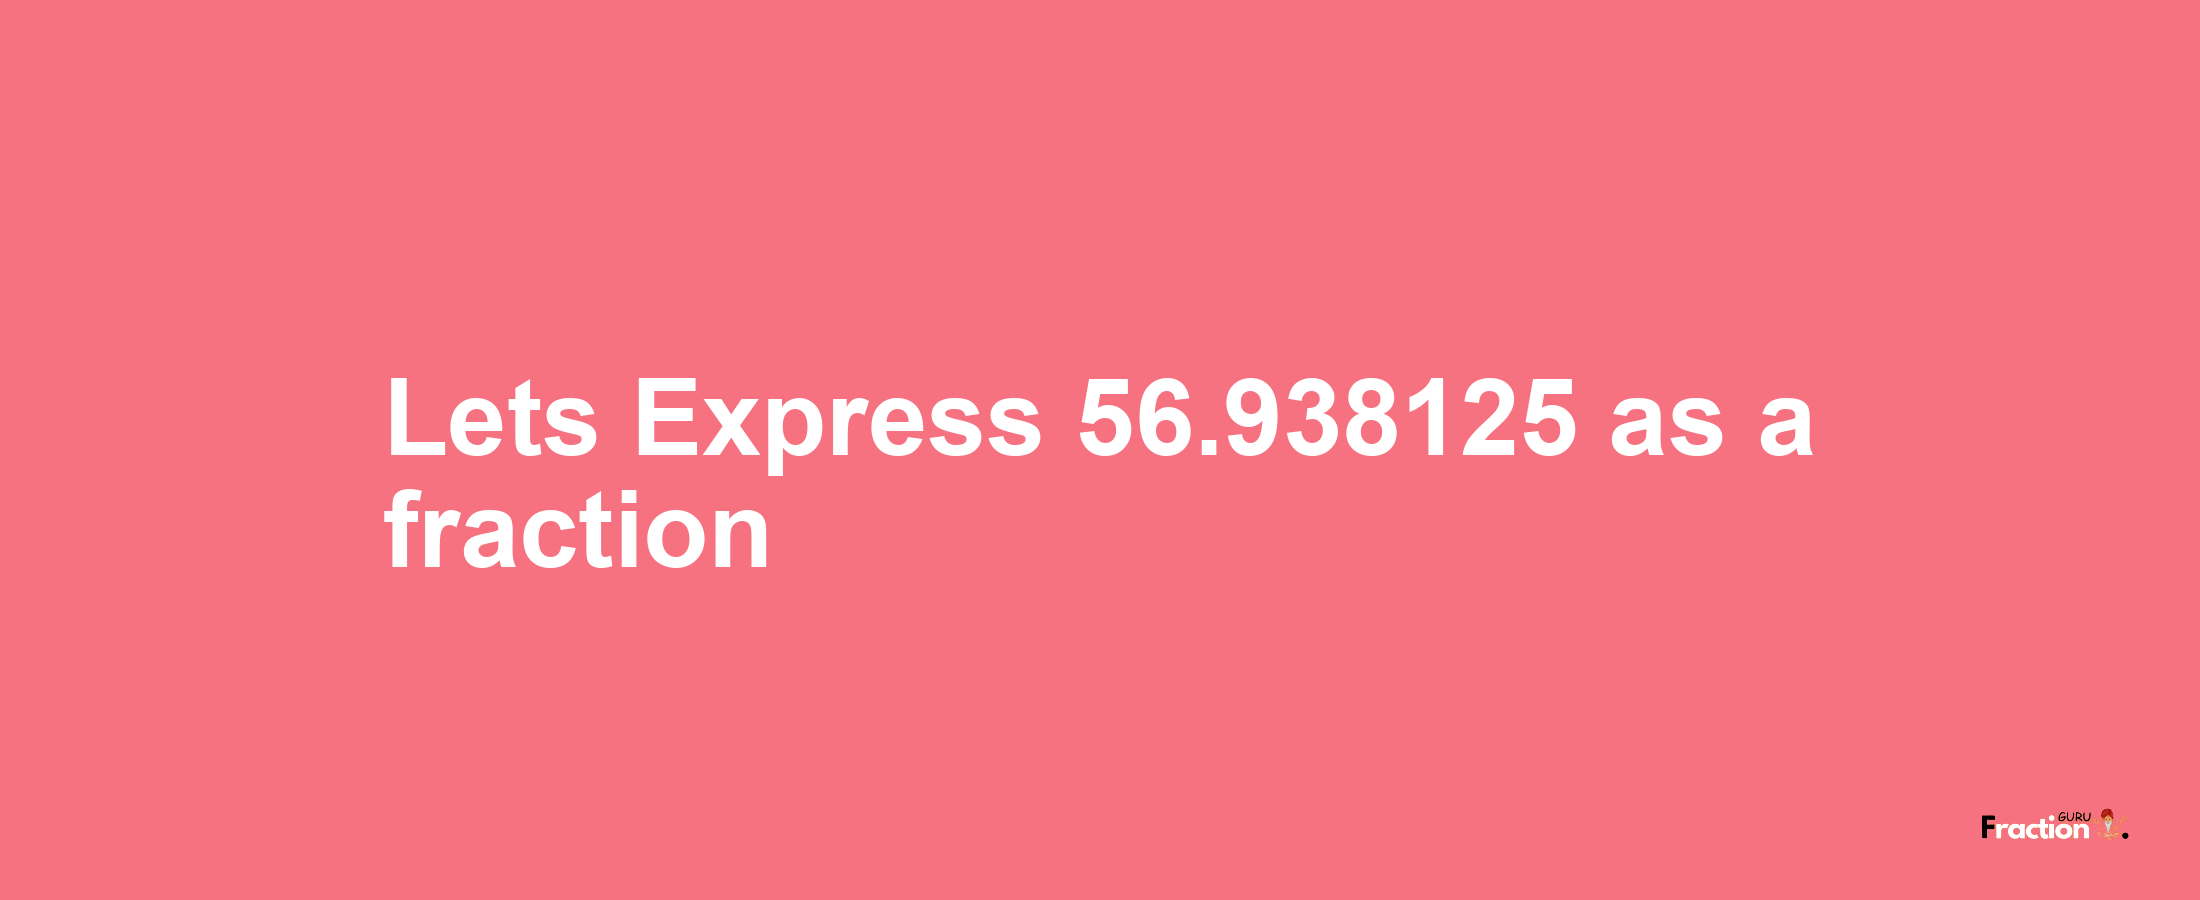 Lets Express 56.938125 as afraction